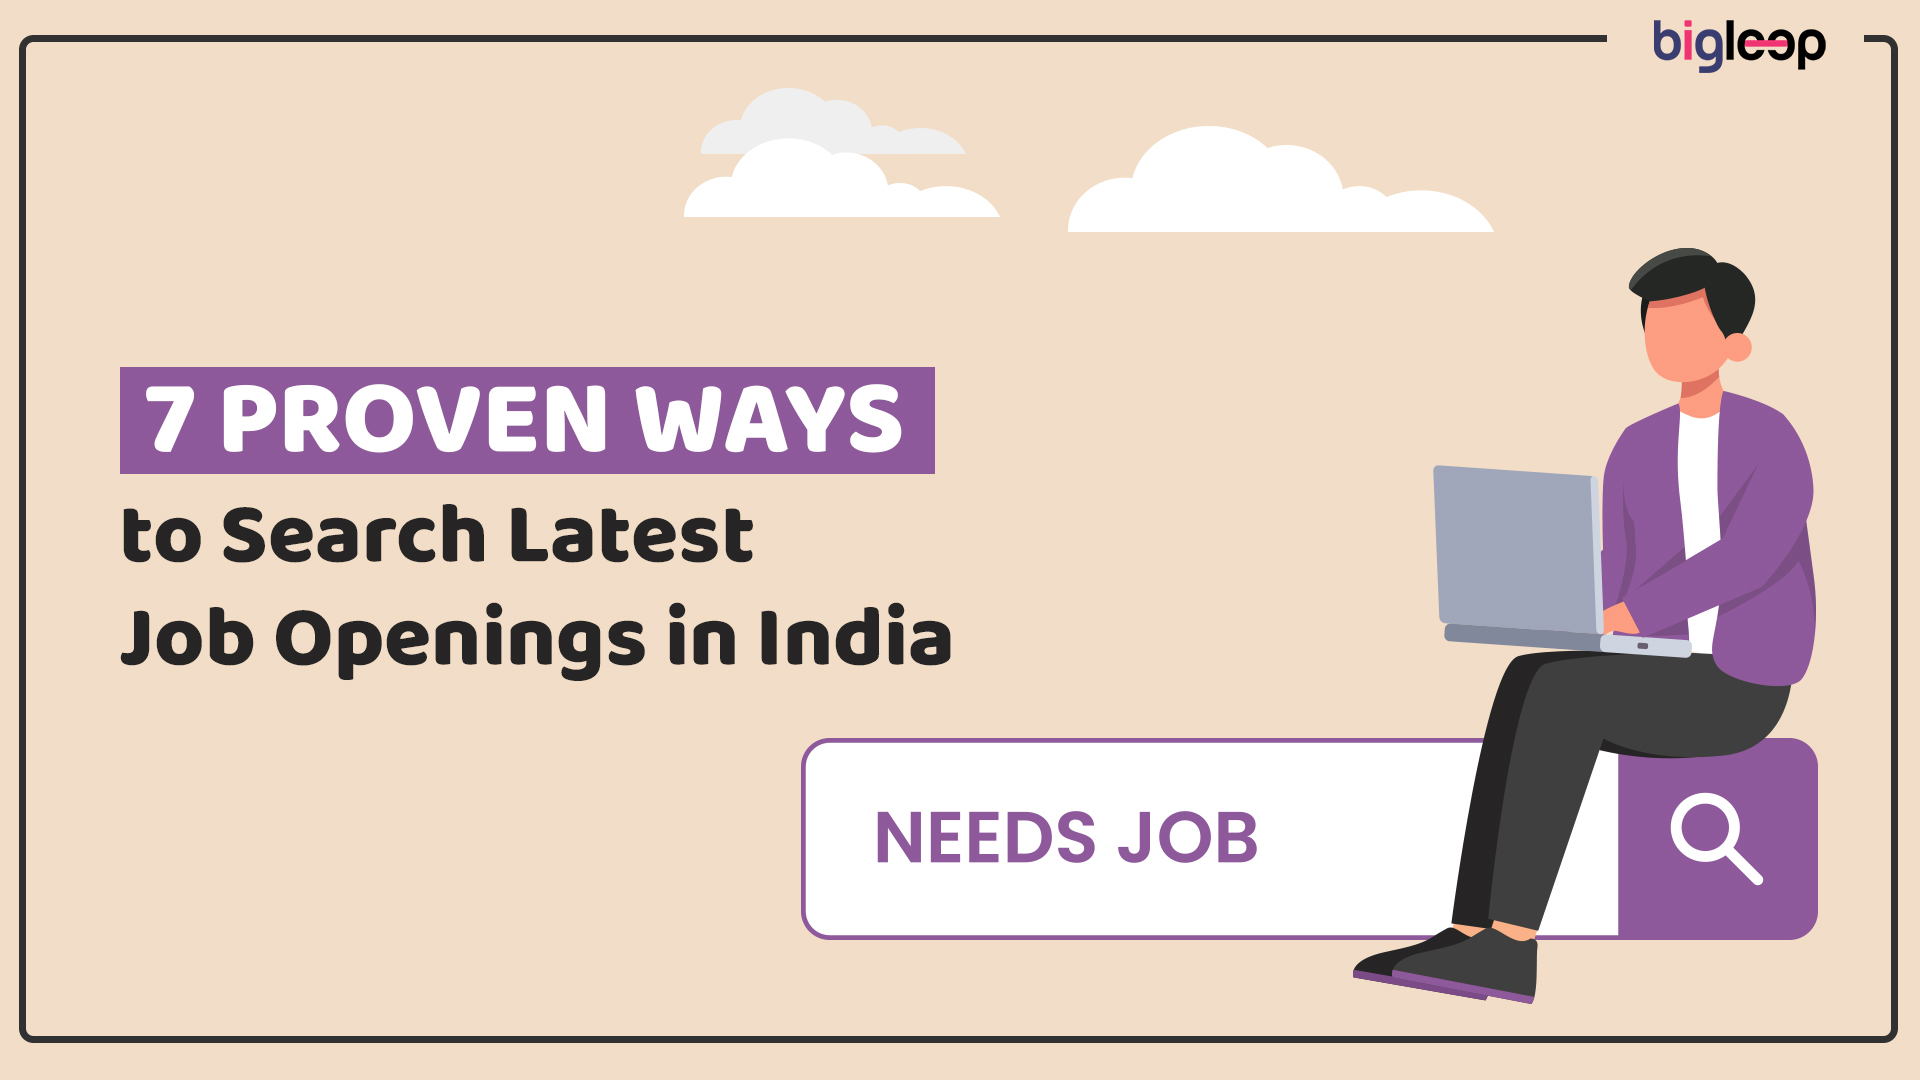 7 Proven Ways To Search Latest Job Openings in India